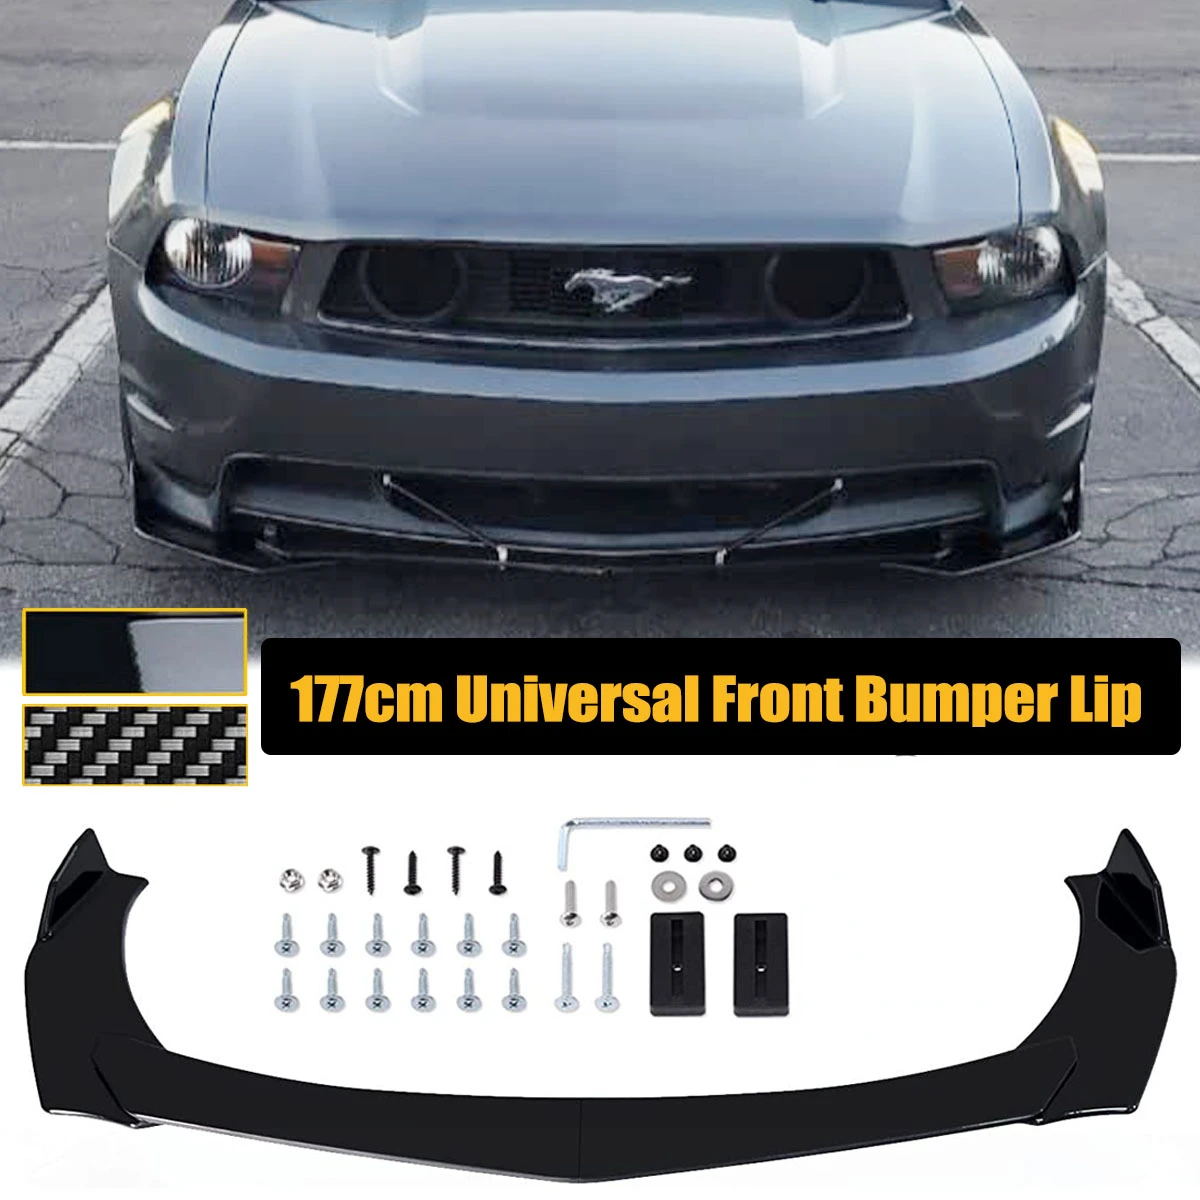 4PCS Universal Front Bumper Lip Chin Spoiler For FORD Mustang GT 2010-2020 Side Splitter Body Kit Guard Car Accessories 177cm